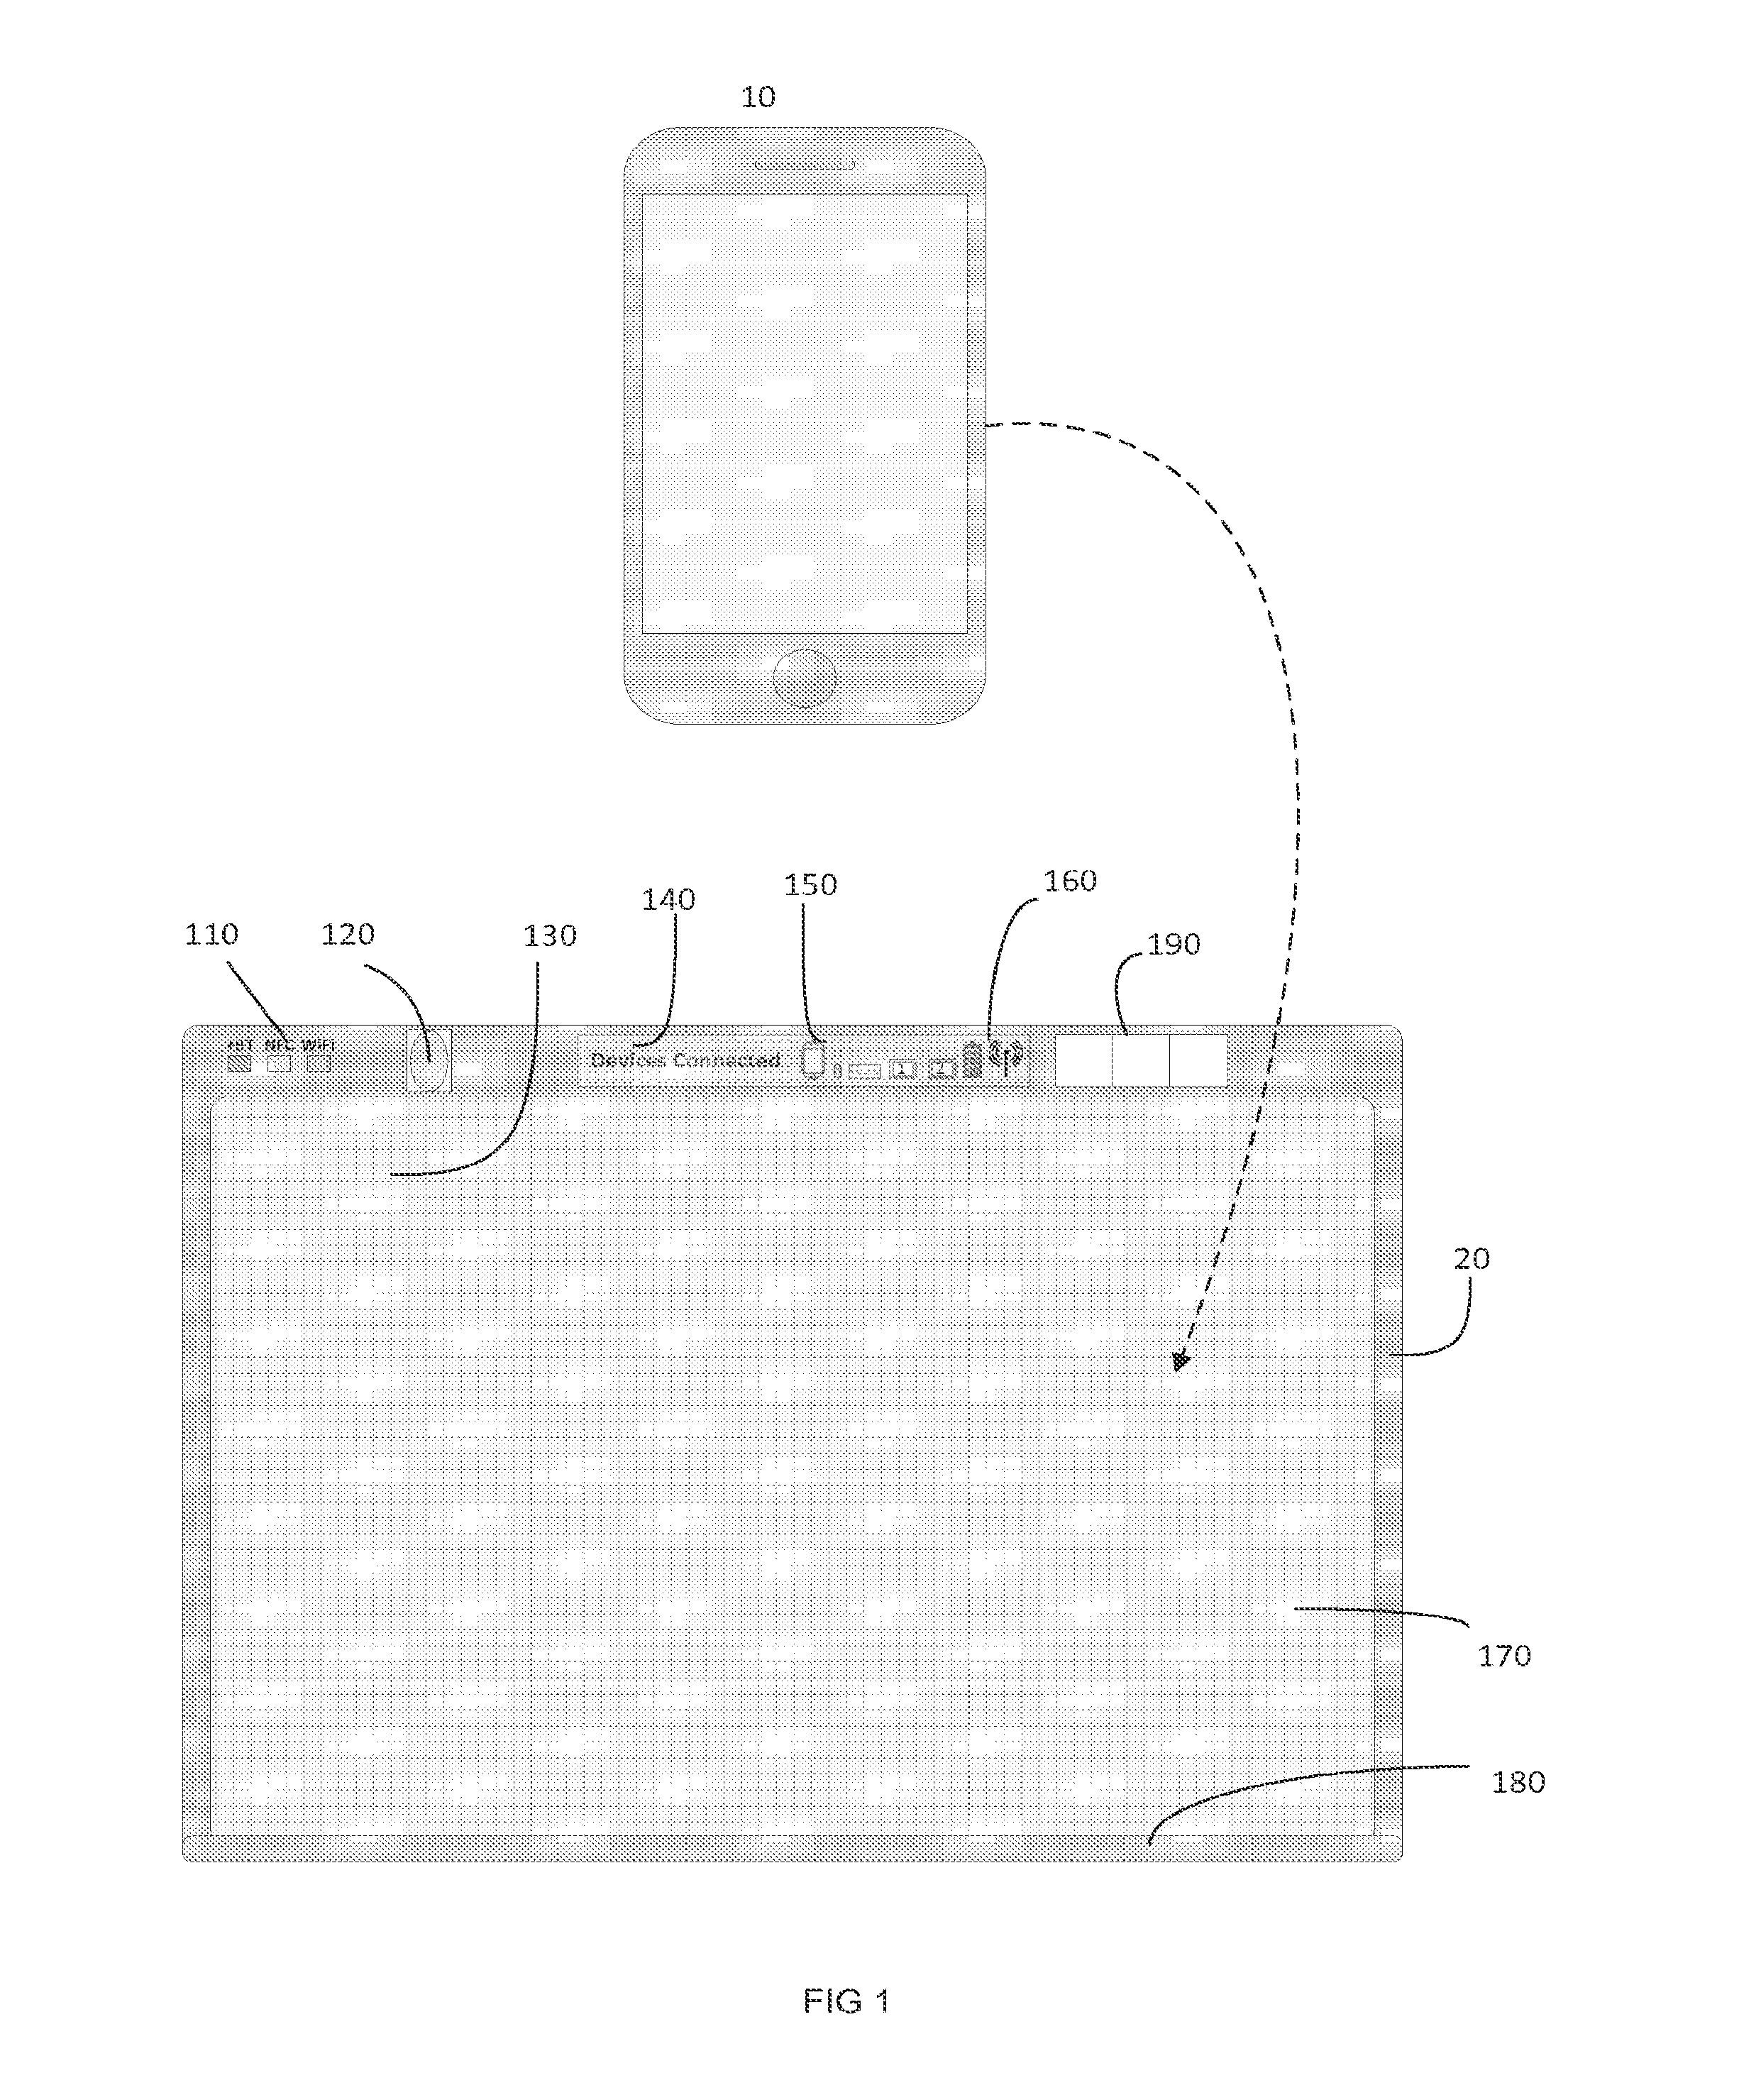 System and Method for Mobile Device Docking Station